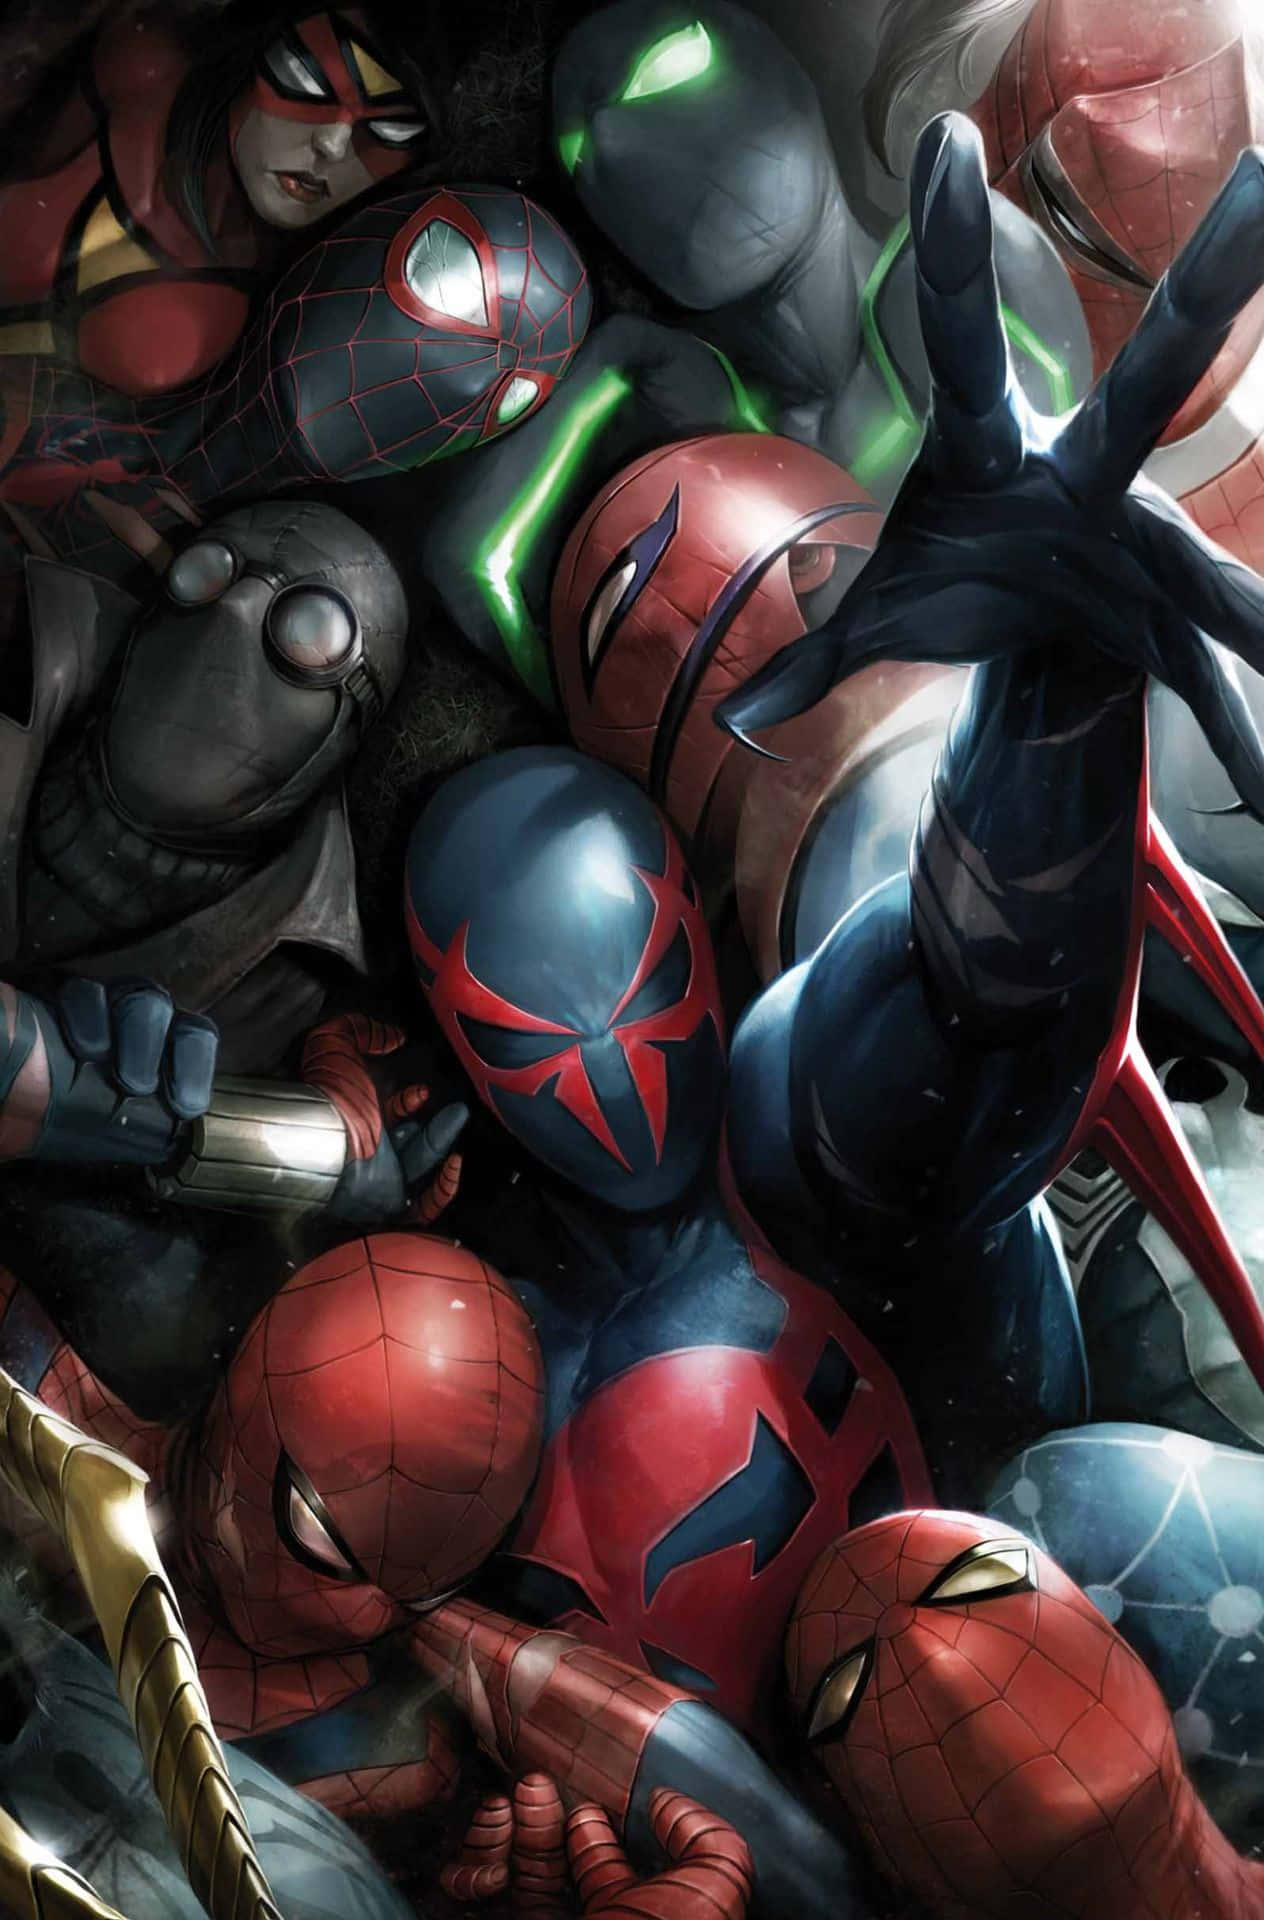 Daring Spider-Man 2099 ready for action Wallpaper